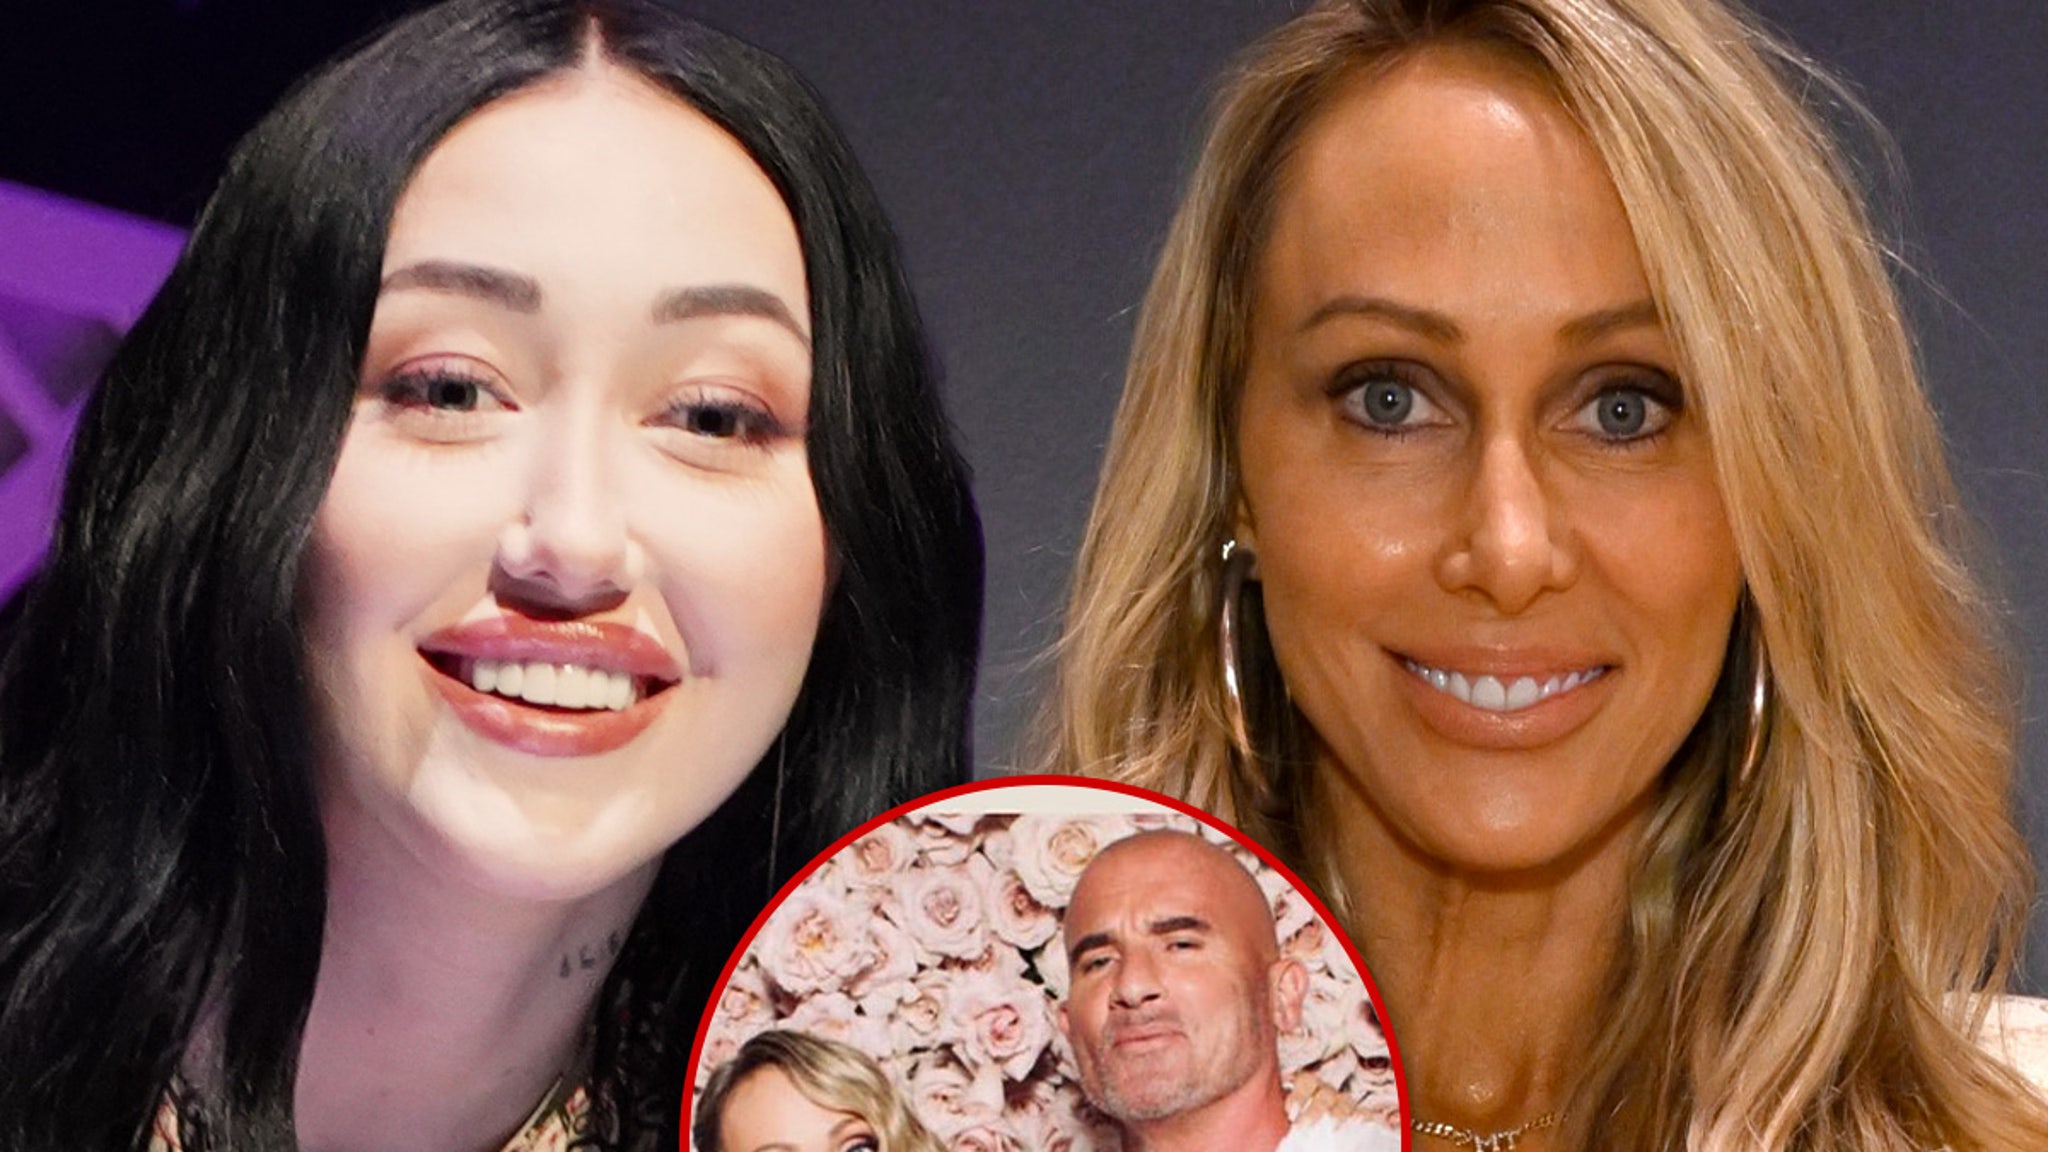 Noah Cyrus again shares IG tribute to mother Tish, family feud seems to be over